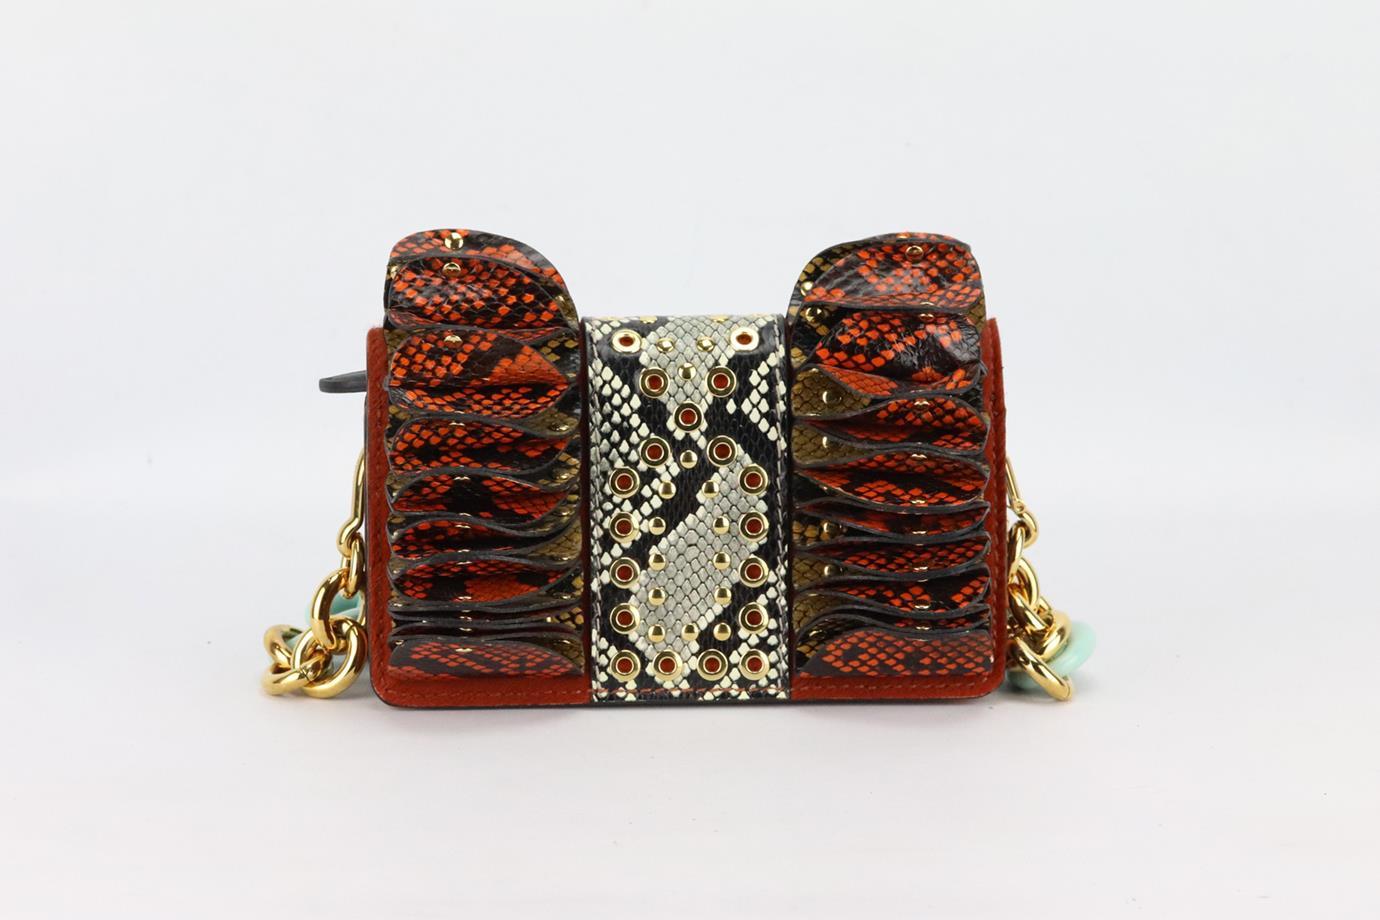 Burberry The Ruffle snakeskin and leather shoulder bag. Made from multi-coloured ruffled snakeskin with leather and calf-hair trim, its finished with gold-tone buckle and chain, it has two large compartments with zipped pocket and card slots.